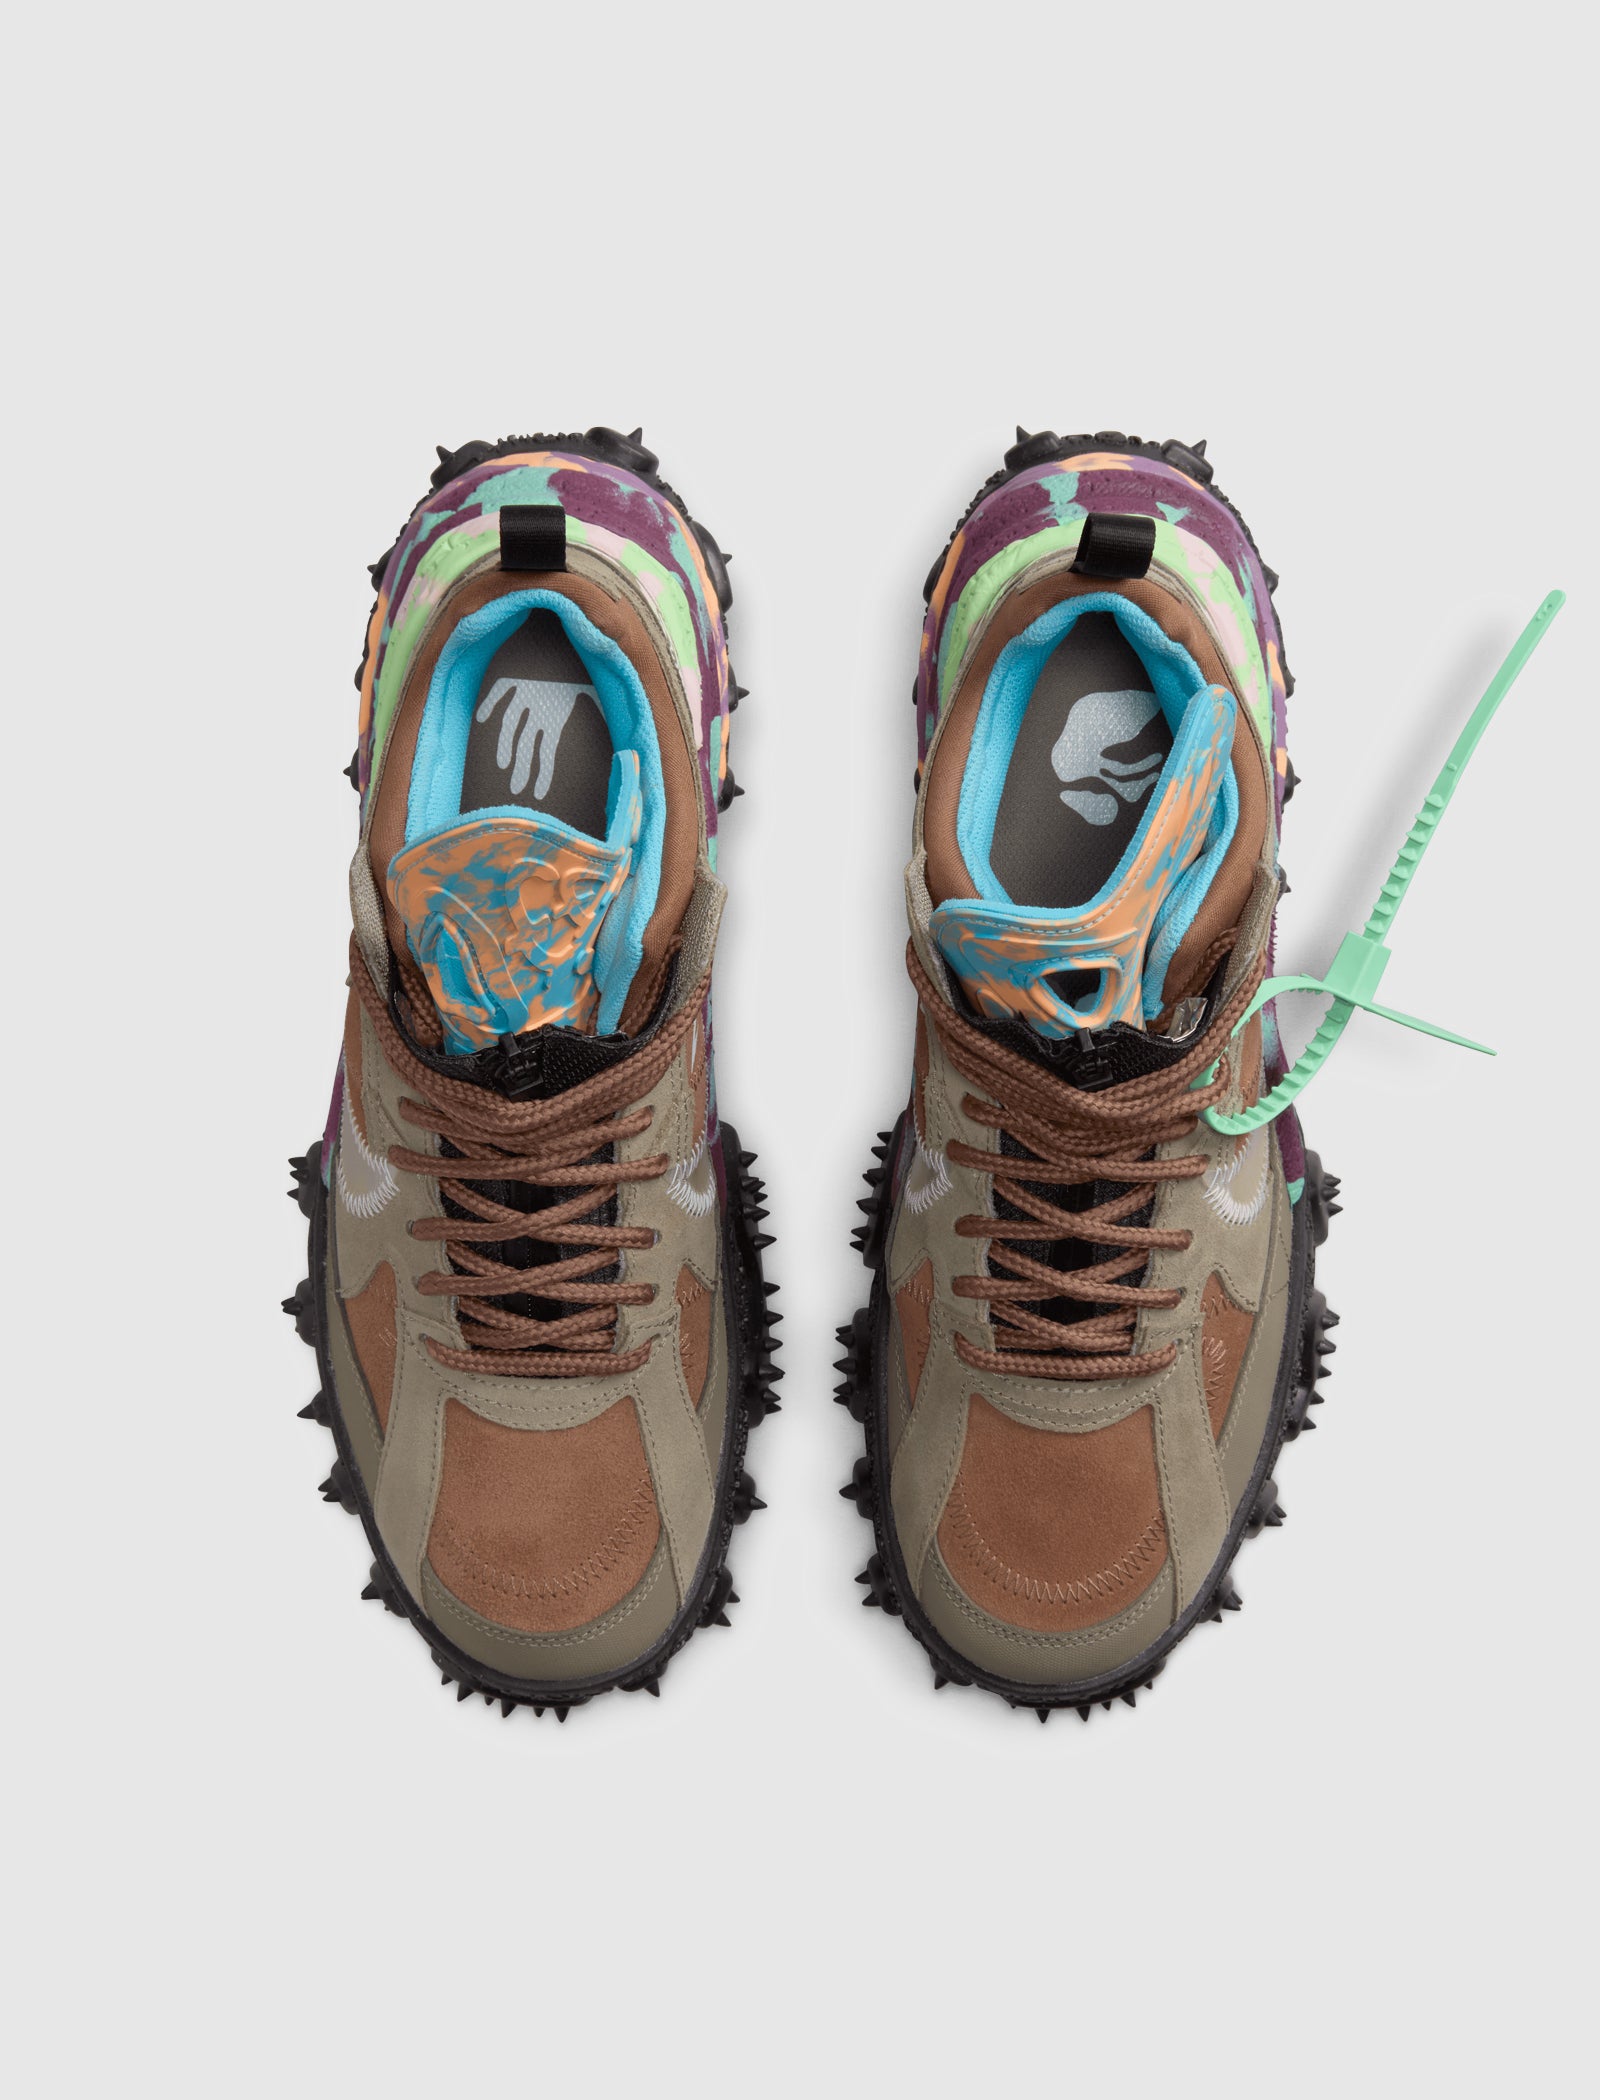 OFF-WHITE AIR TERRA FORMA "ARCHAEO BROWN"